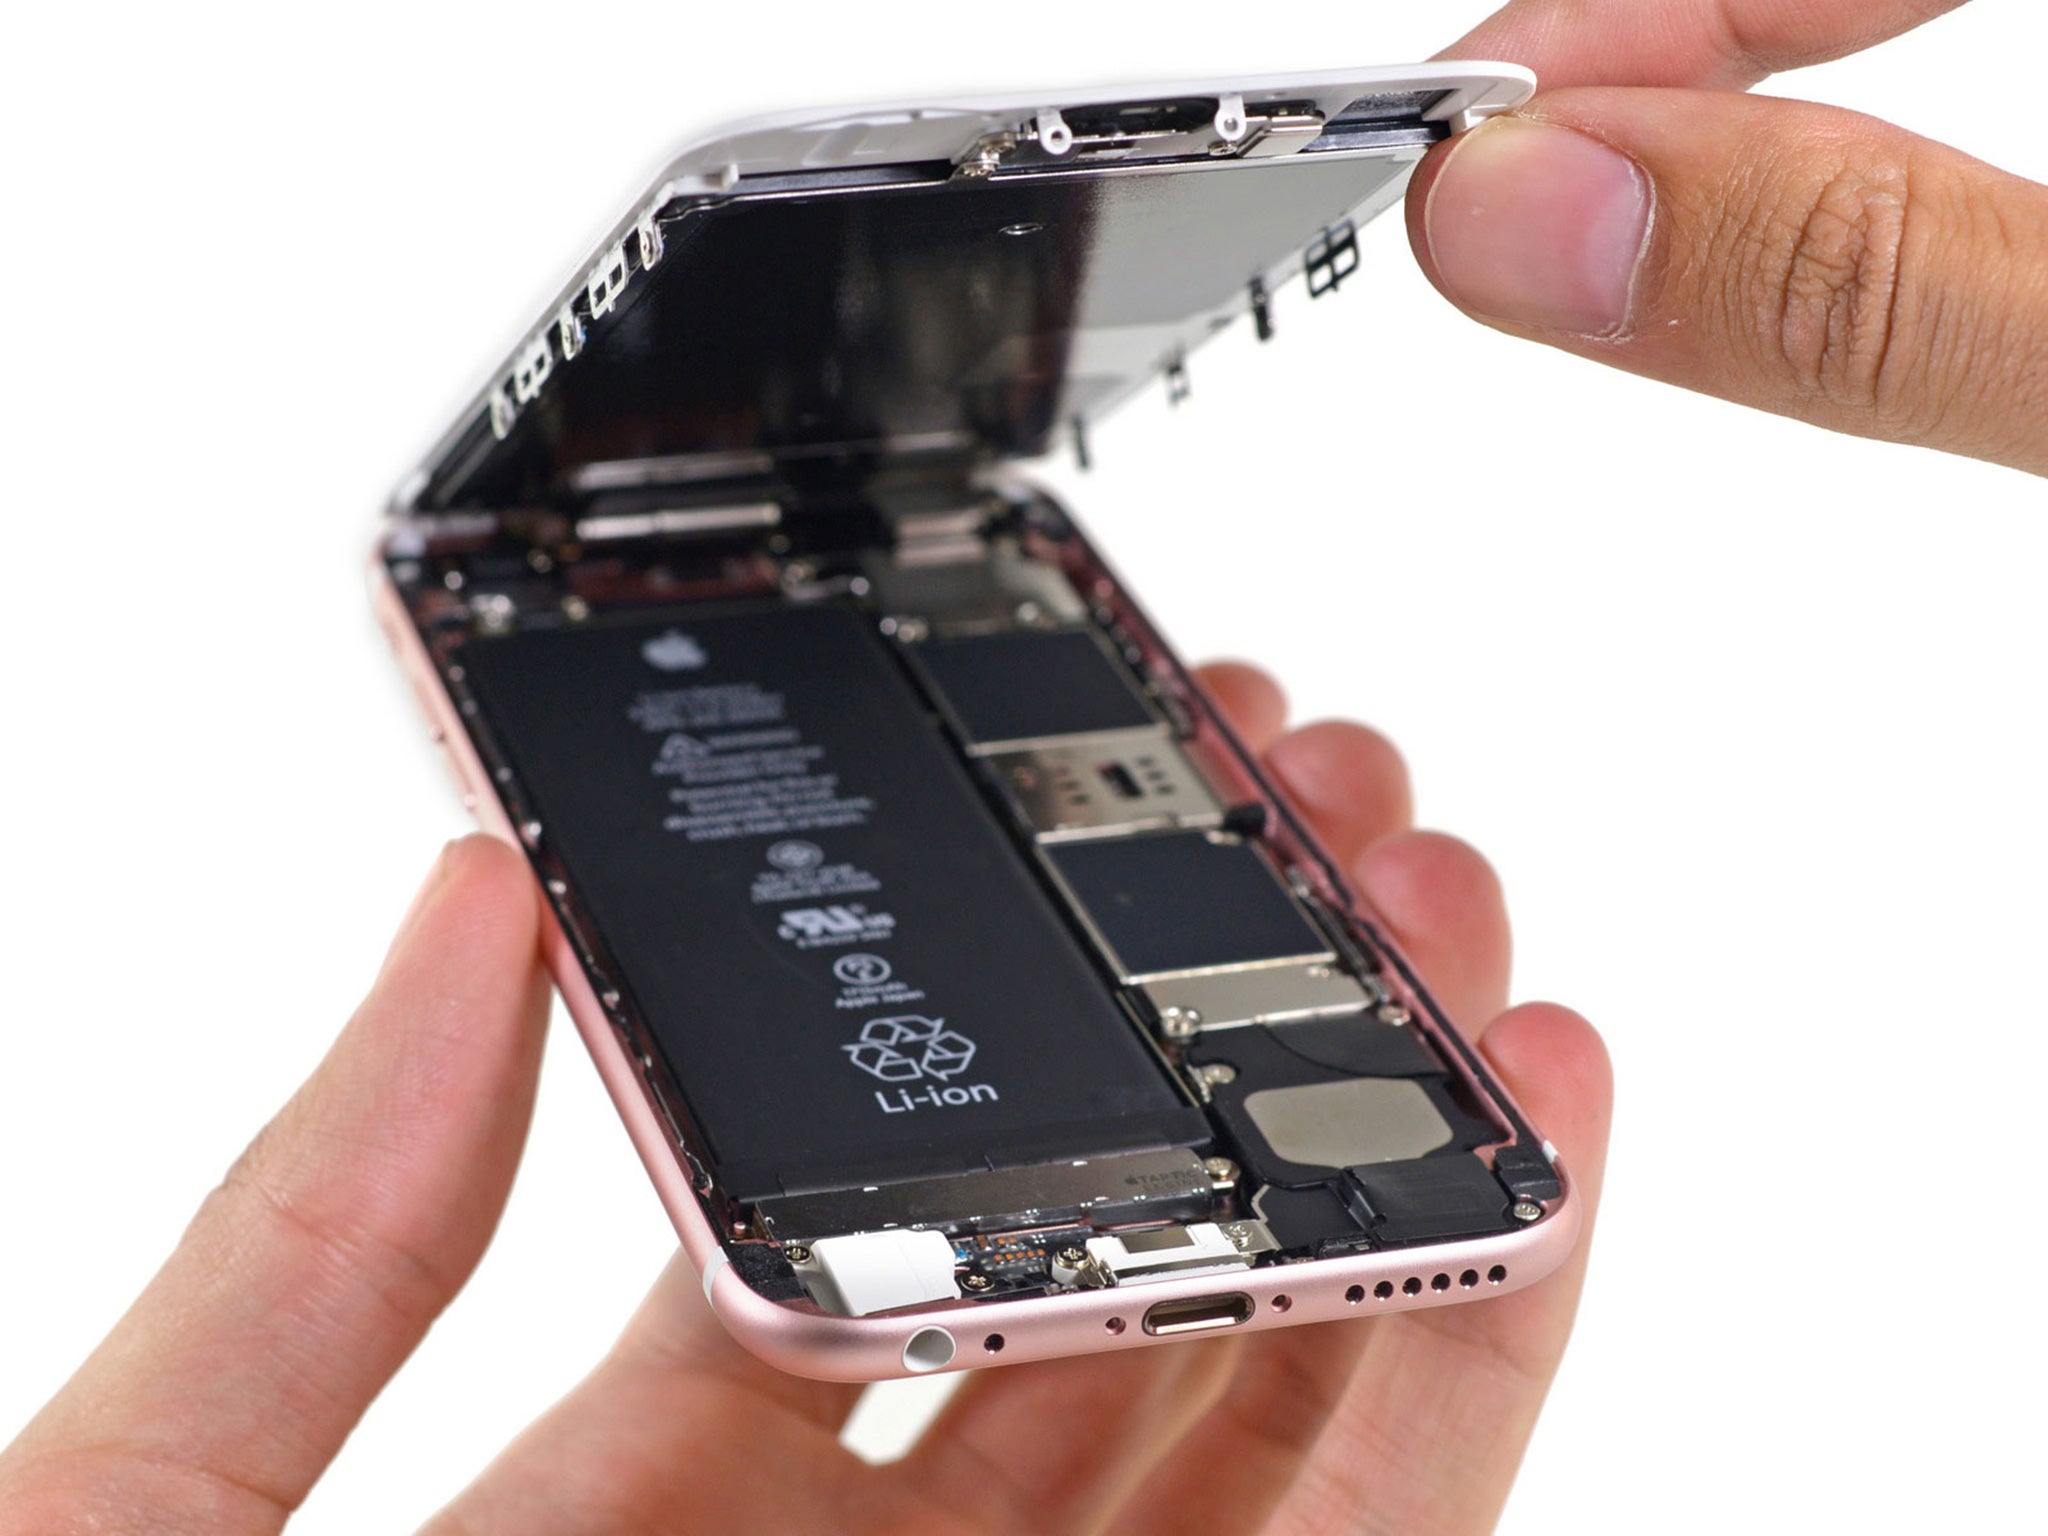 A photo from iFixit's teardown of the iPhone 6s